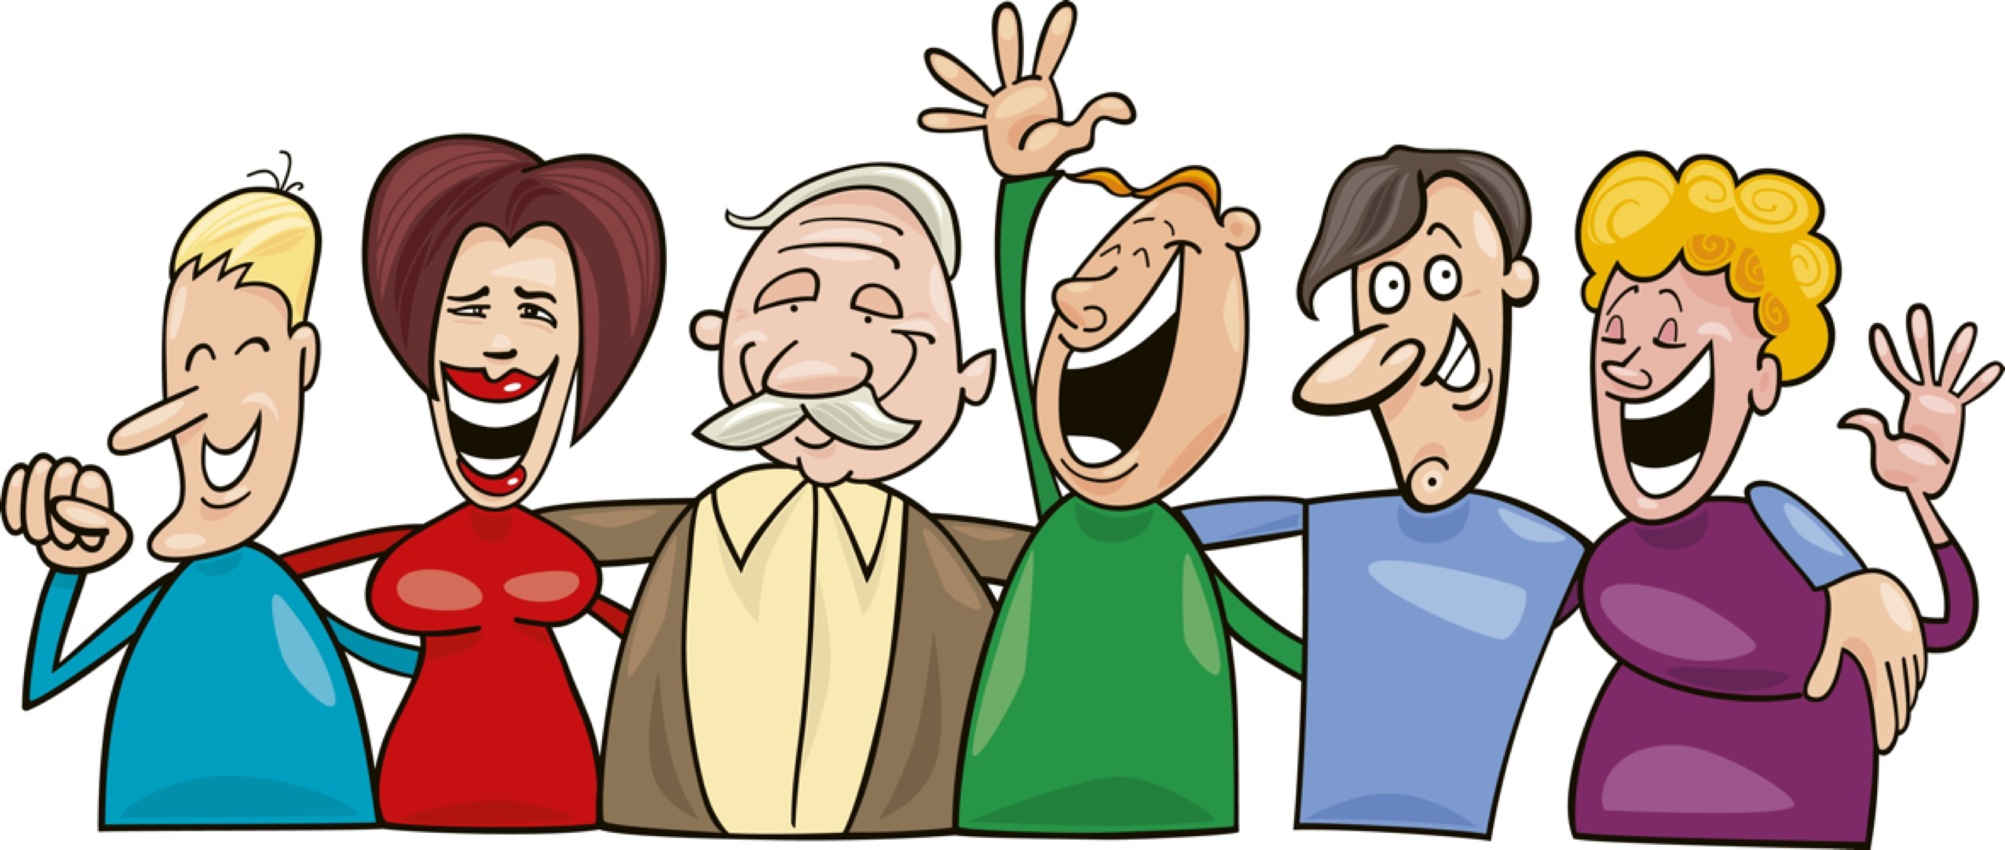 happy group clipart - photo #10